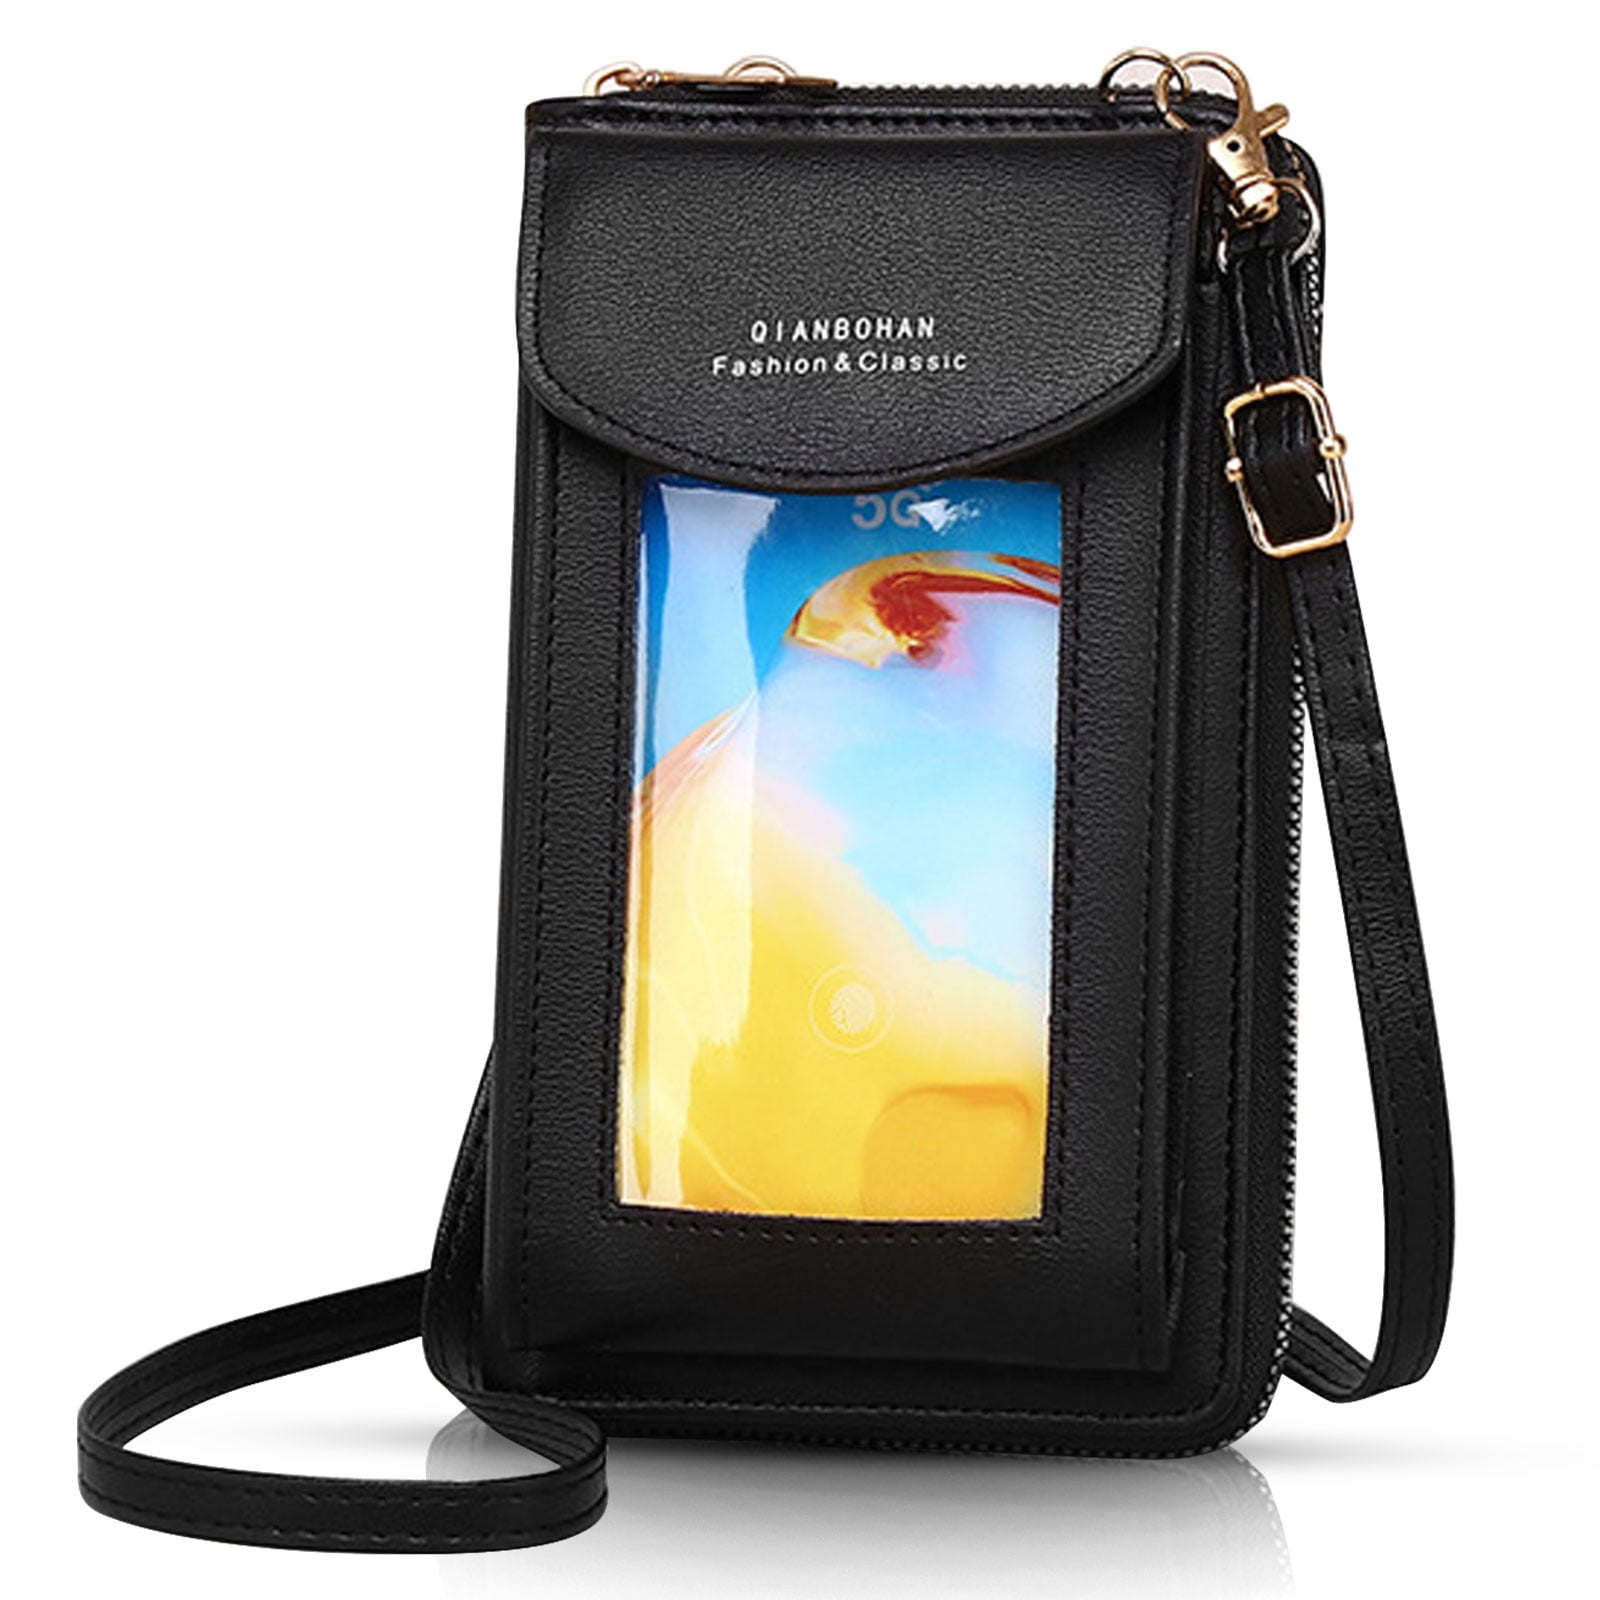 EEEkit Touch Screen Cell Phone Purse, Small Crossbody Bag, Smartphone Wallet, Mini Women Handbag with Removable Strap